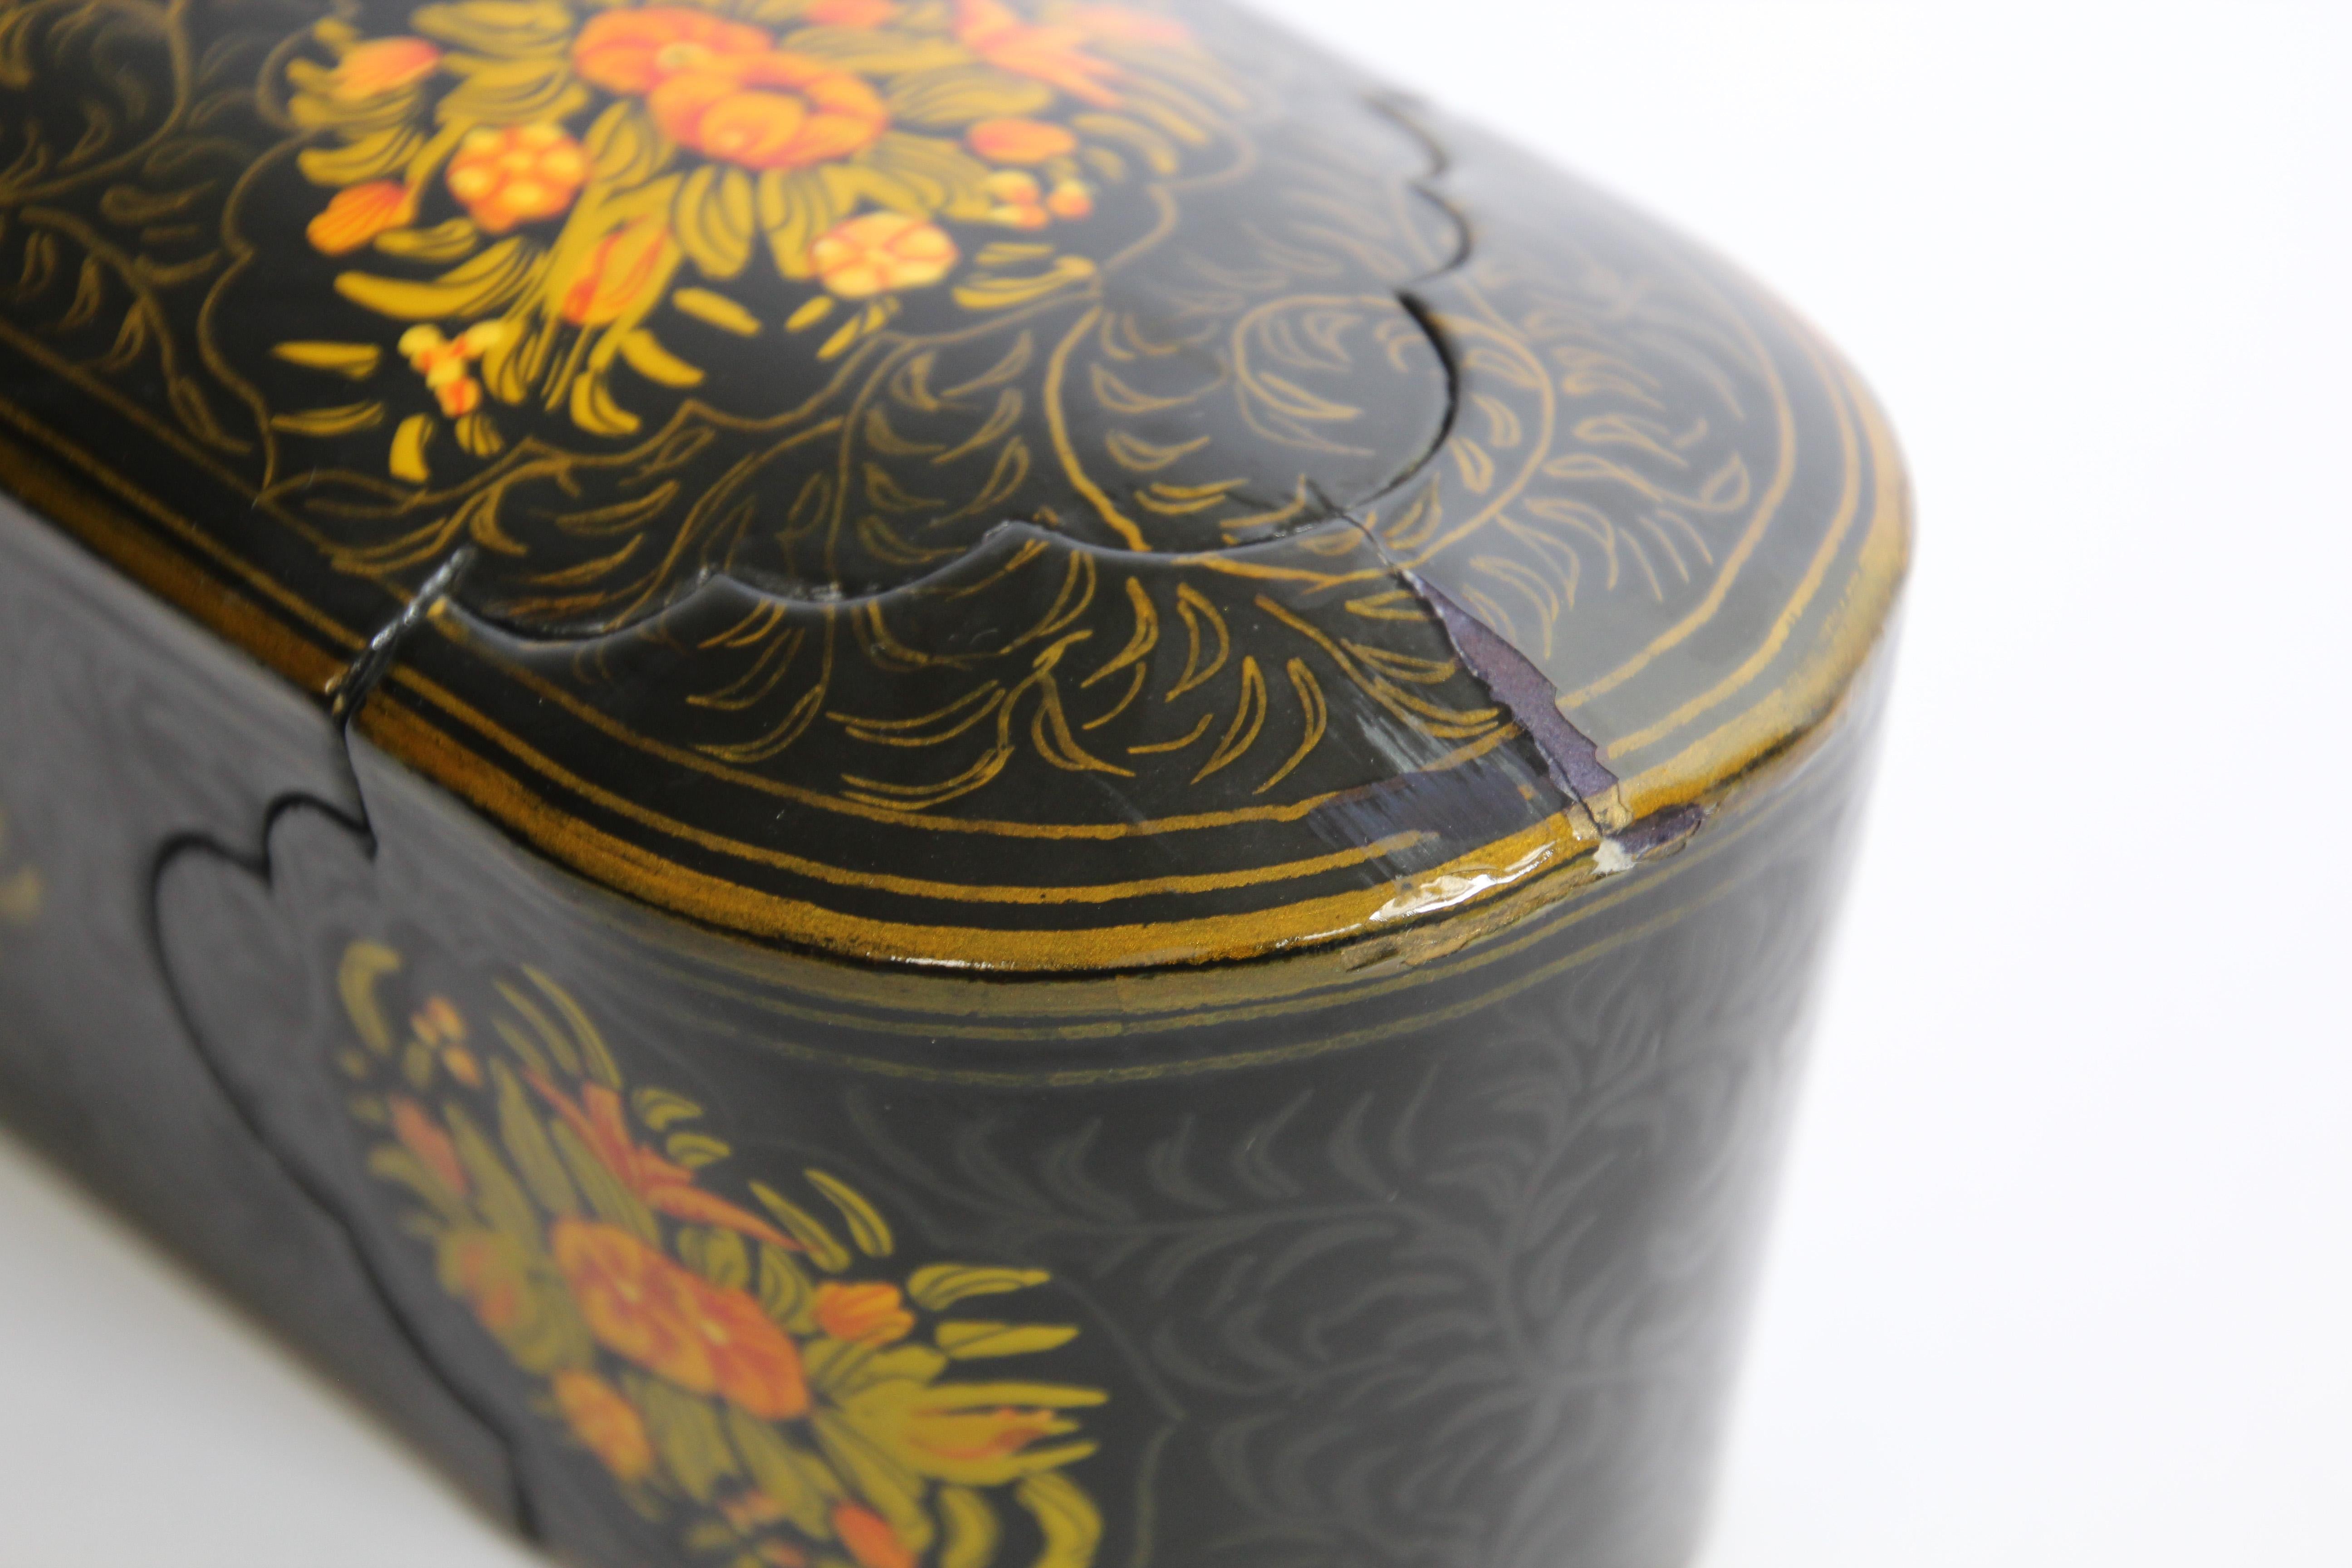 Indo Persian Lacquer Pen Box Hand Painted with Floral Design 9